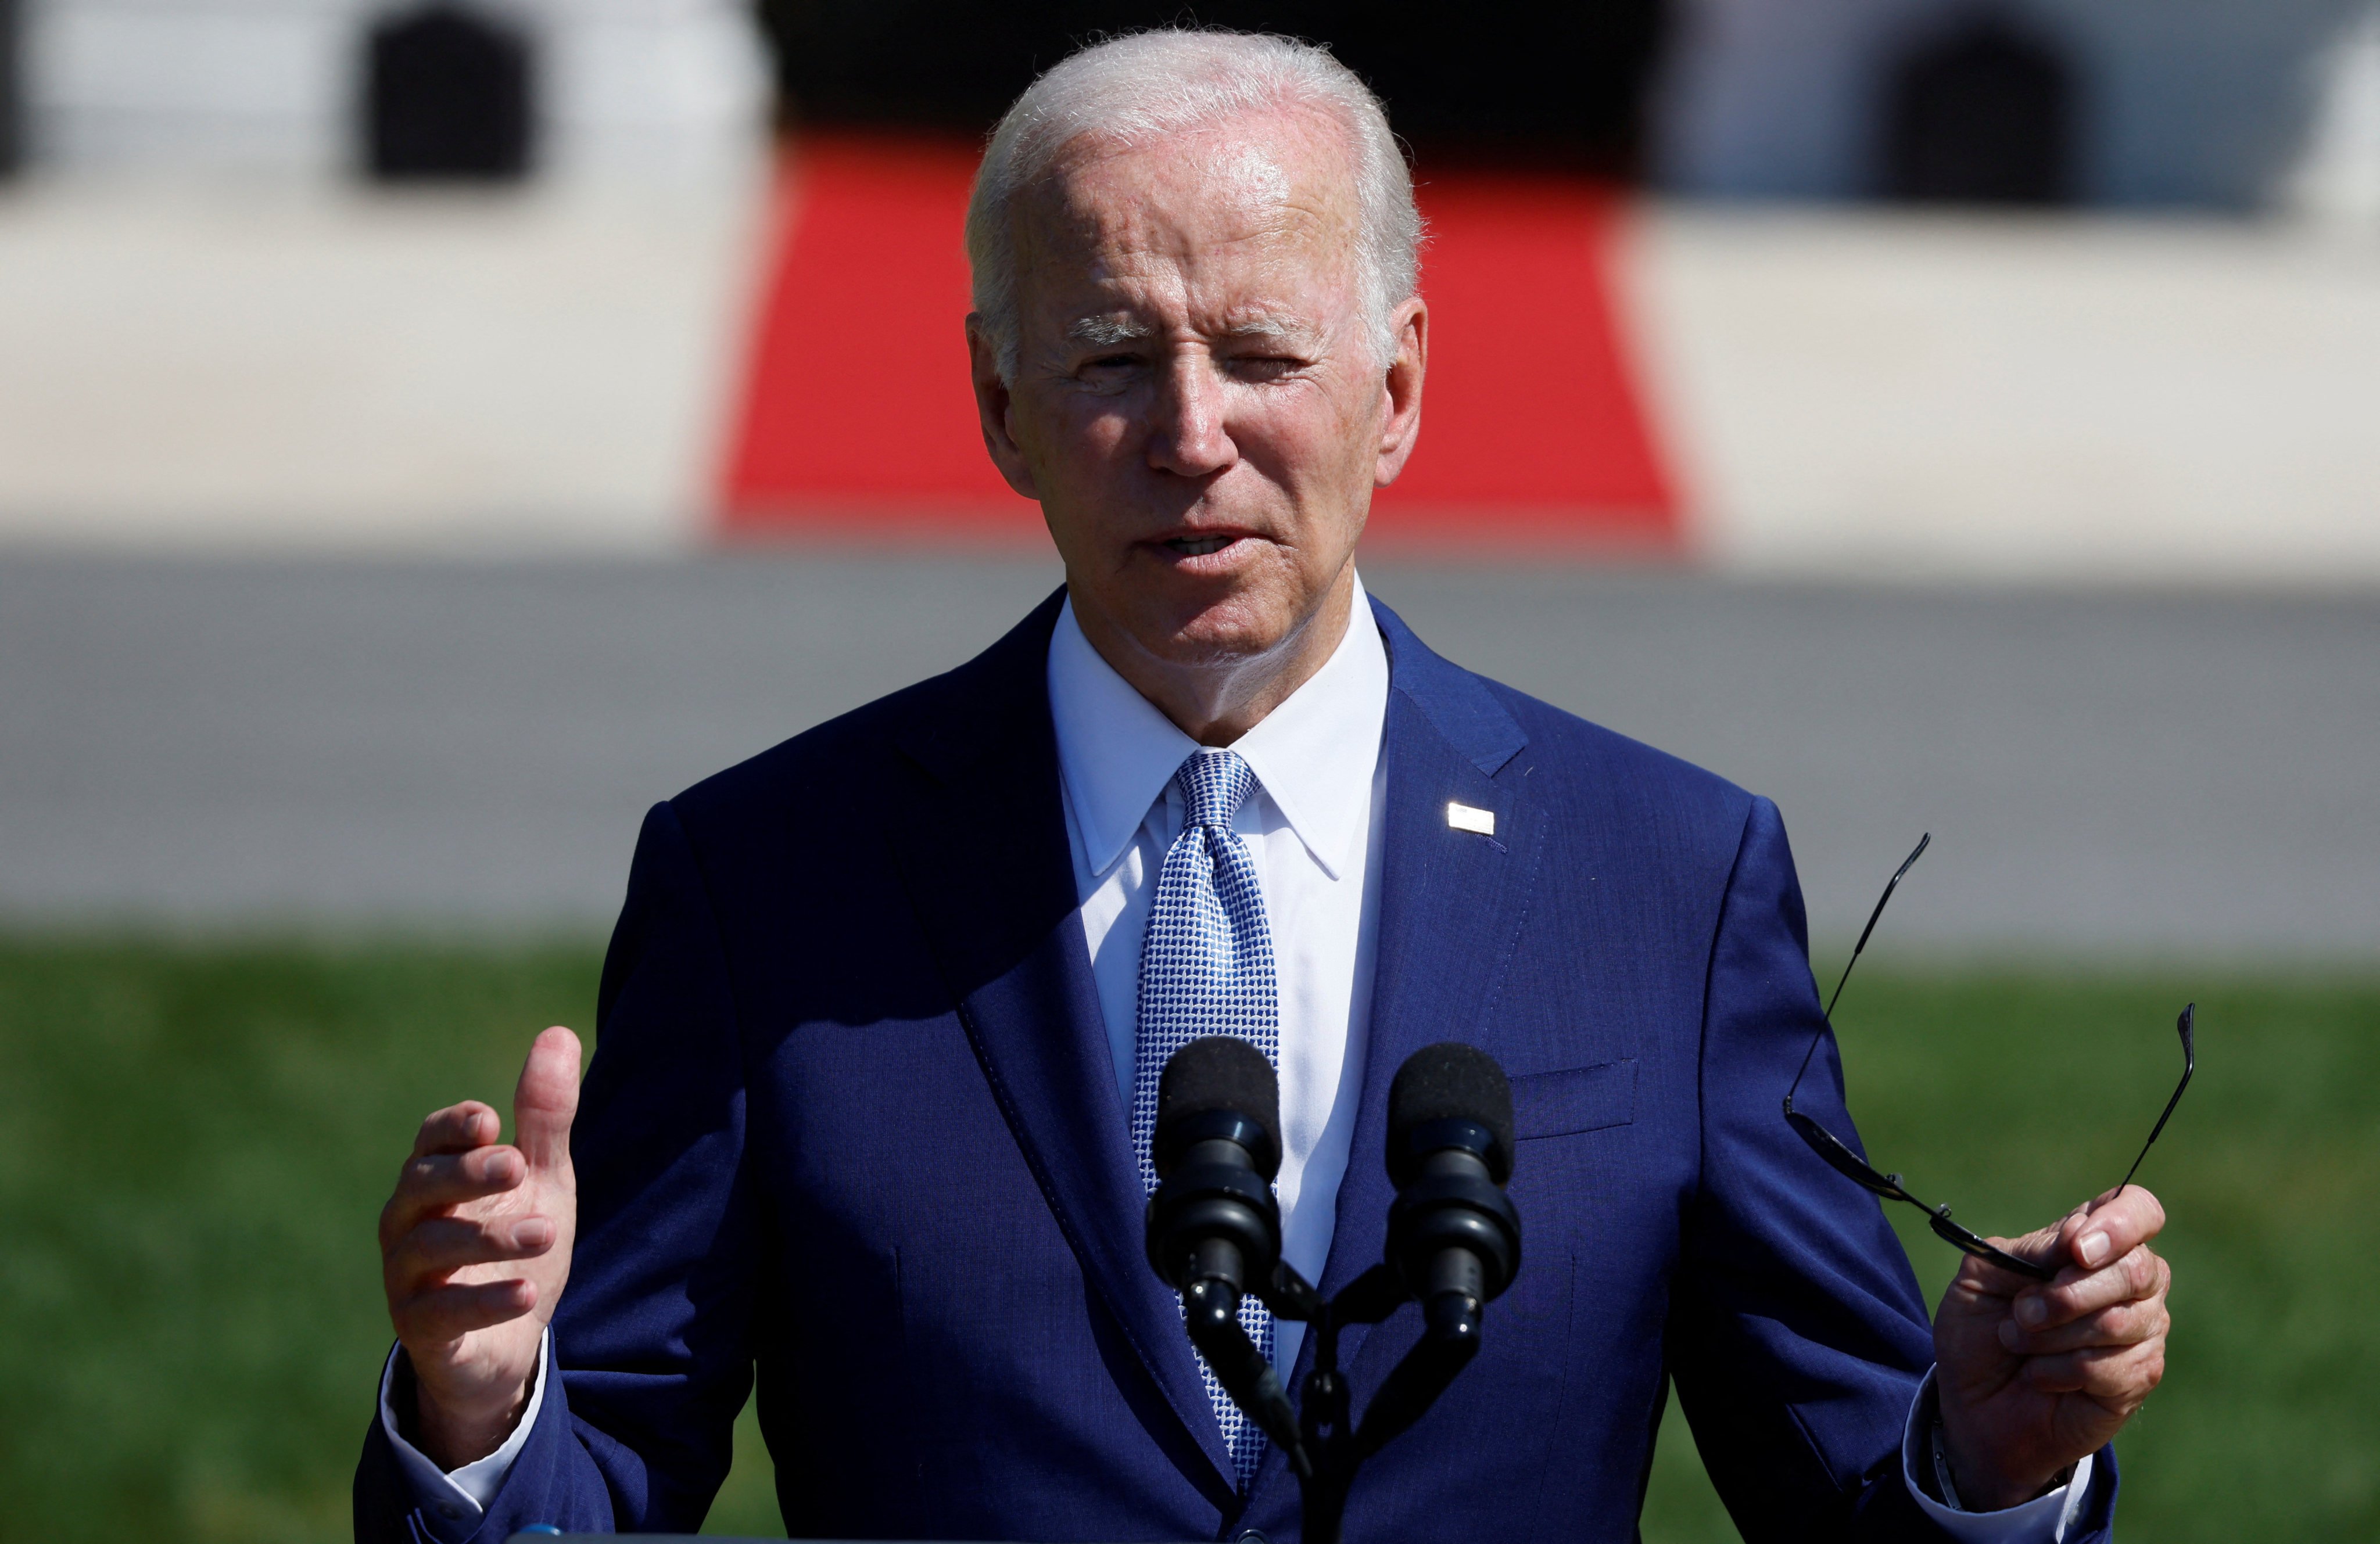 US President Joe Biden delivers remarks during a signing event for the Chips and Science Act on the South Lawn of the White House in Washington on August 9. Photo: Reuters